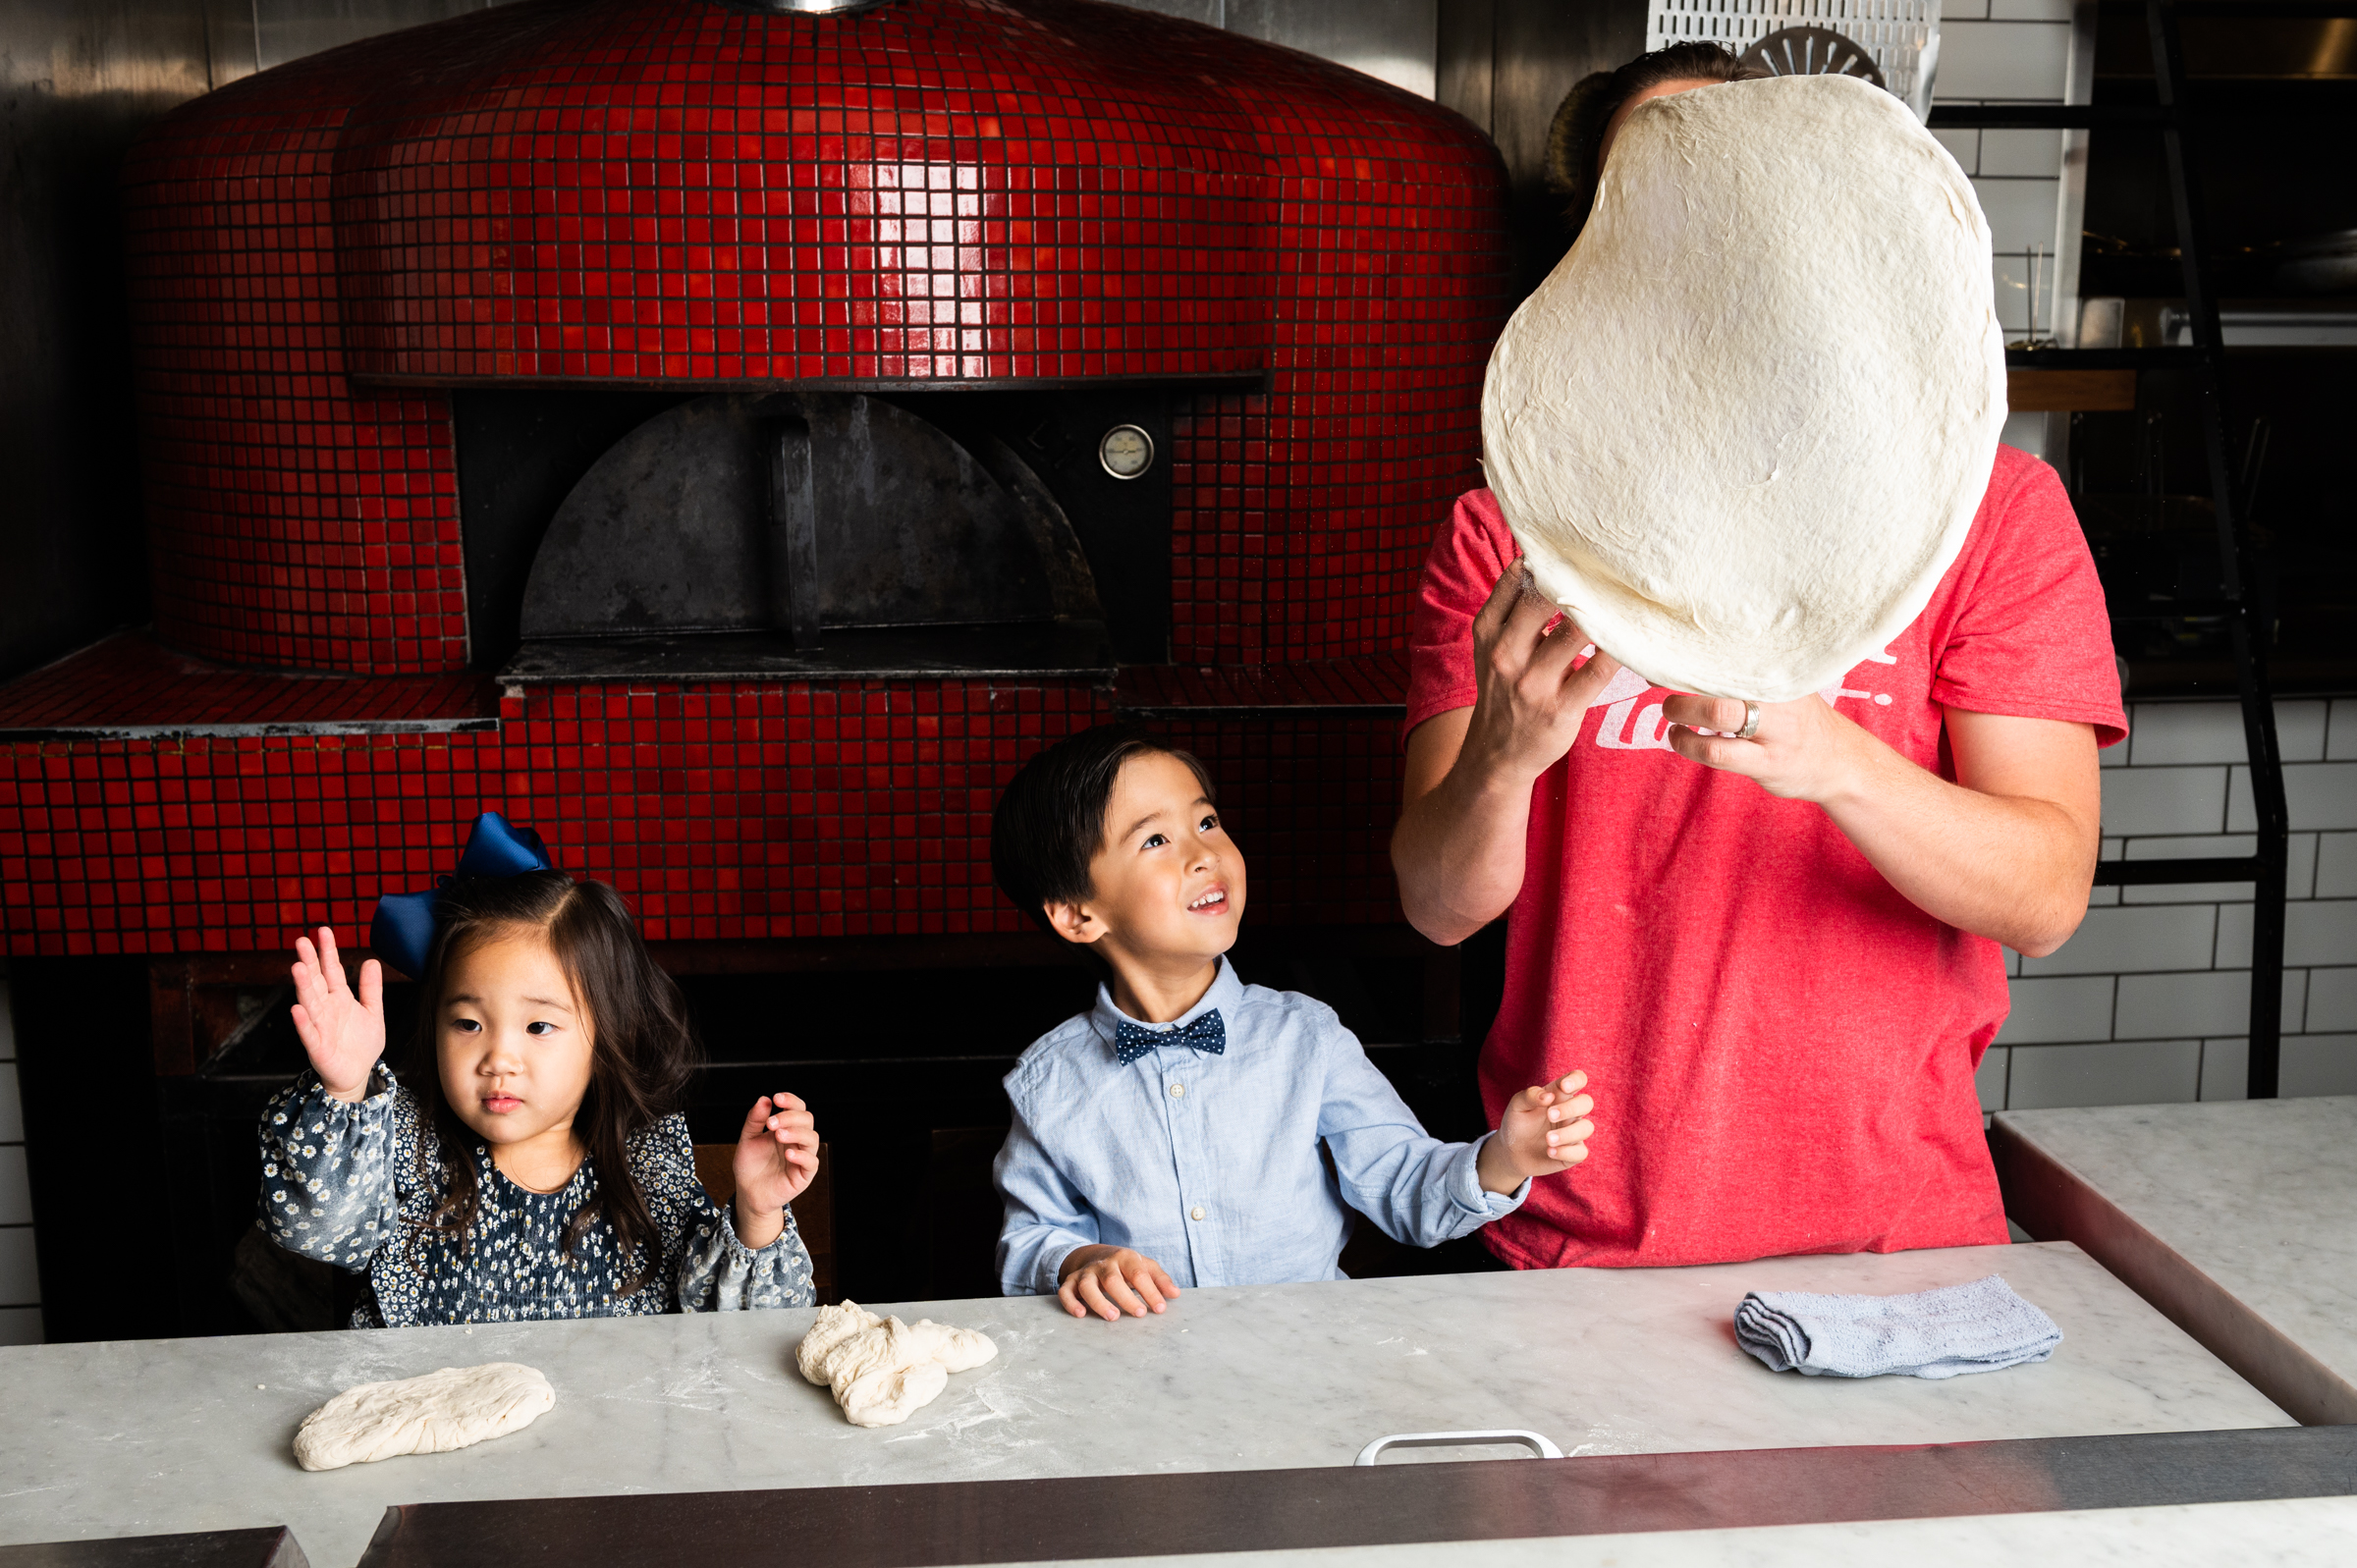 Making pizza with the Pardini family at Annex Kitchen